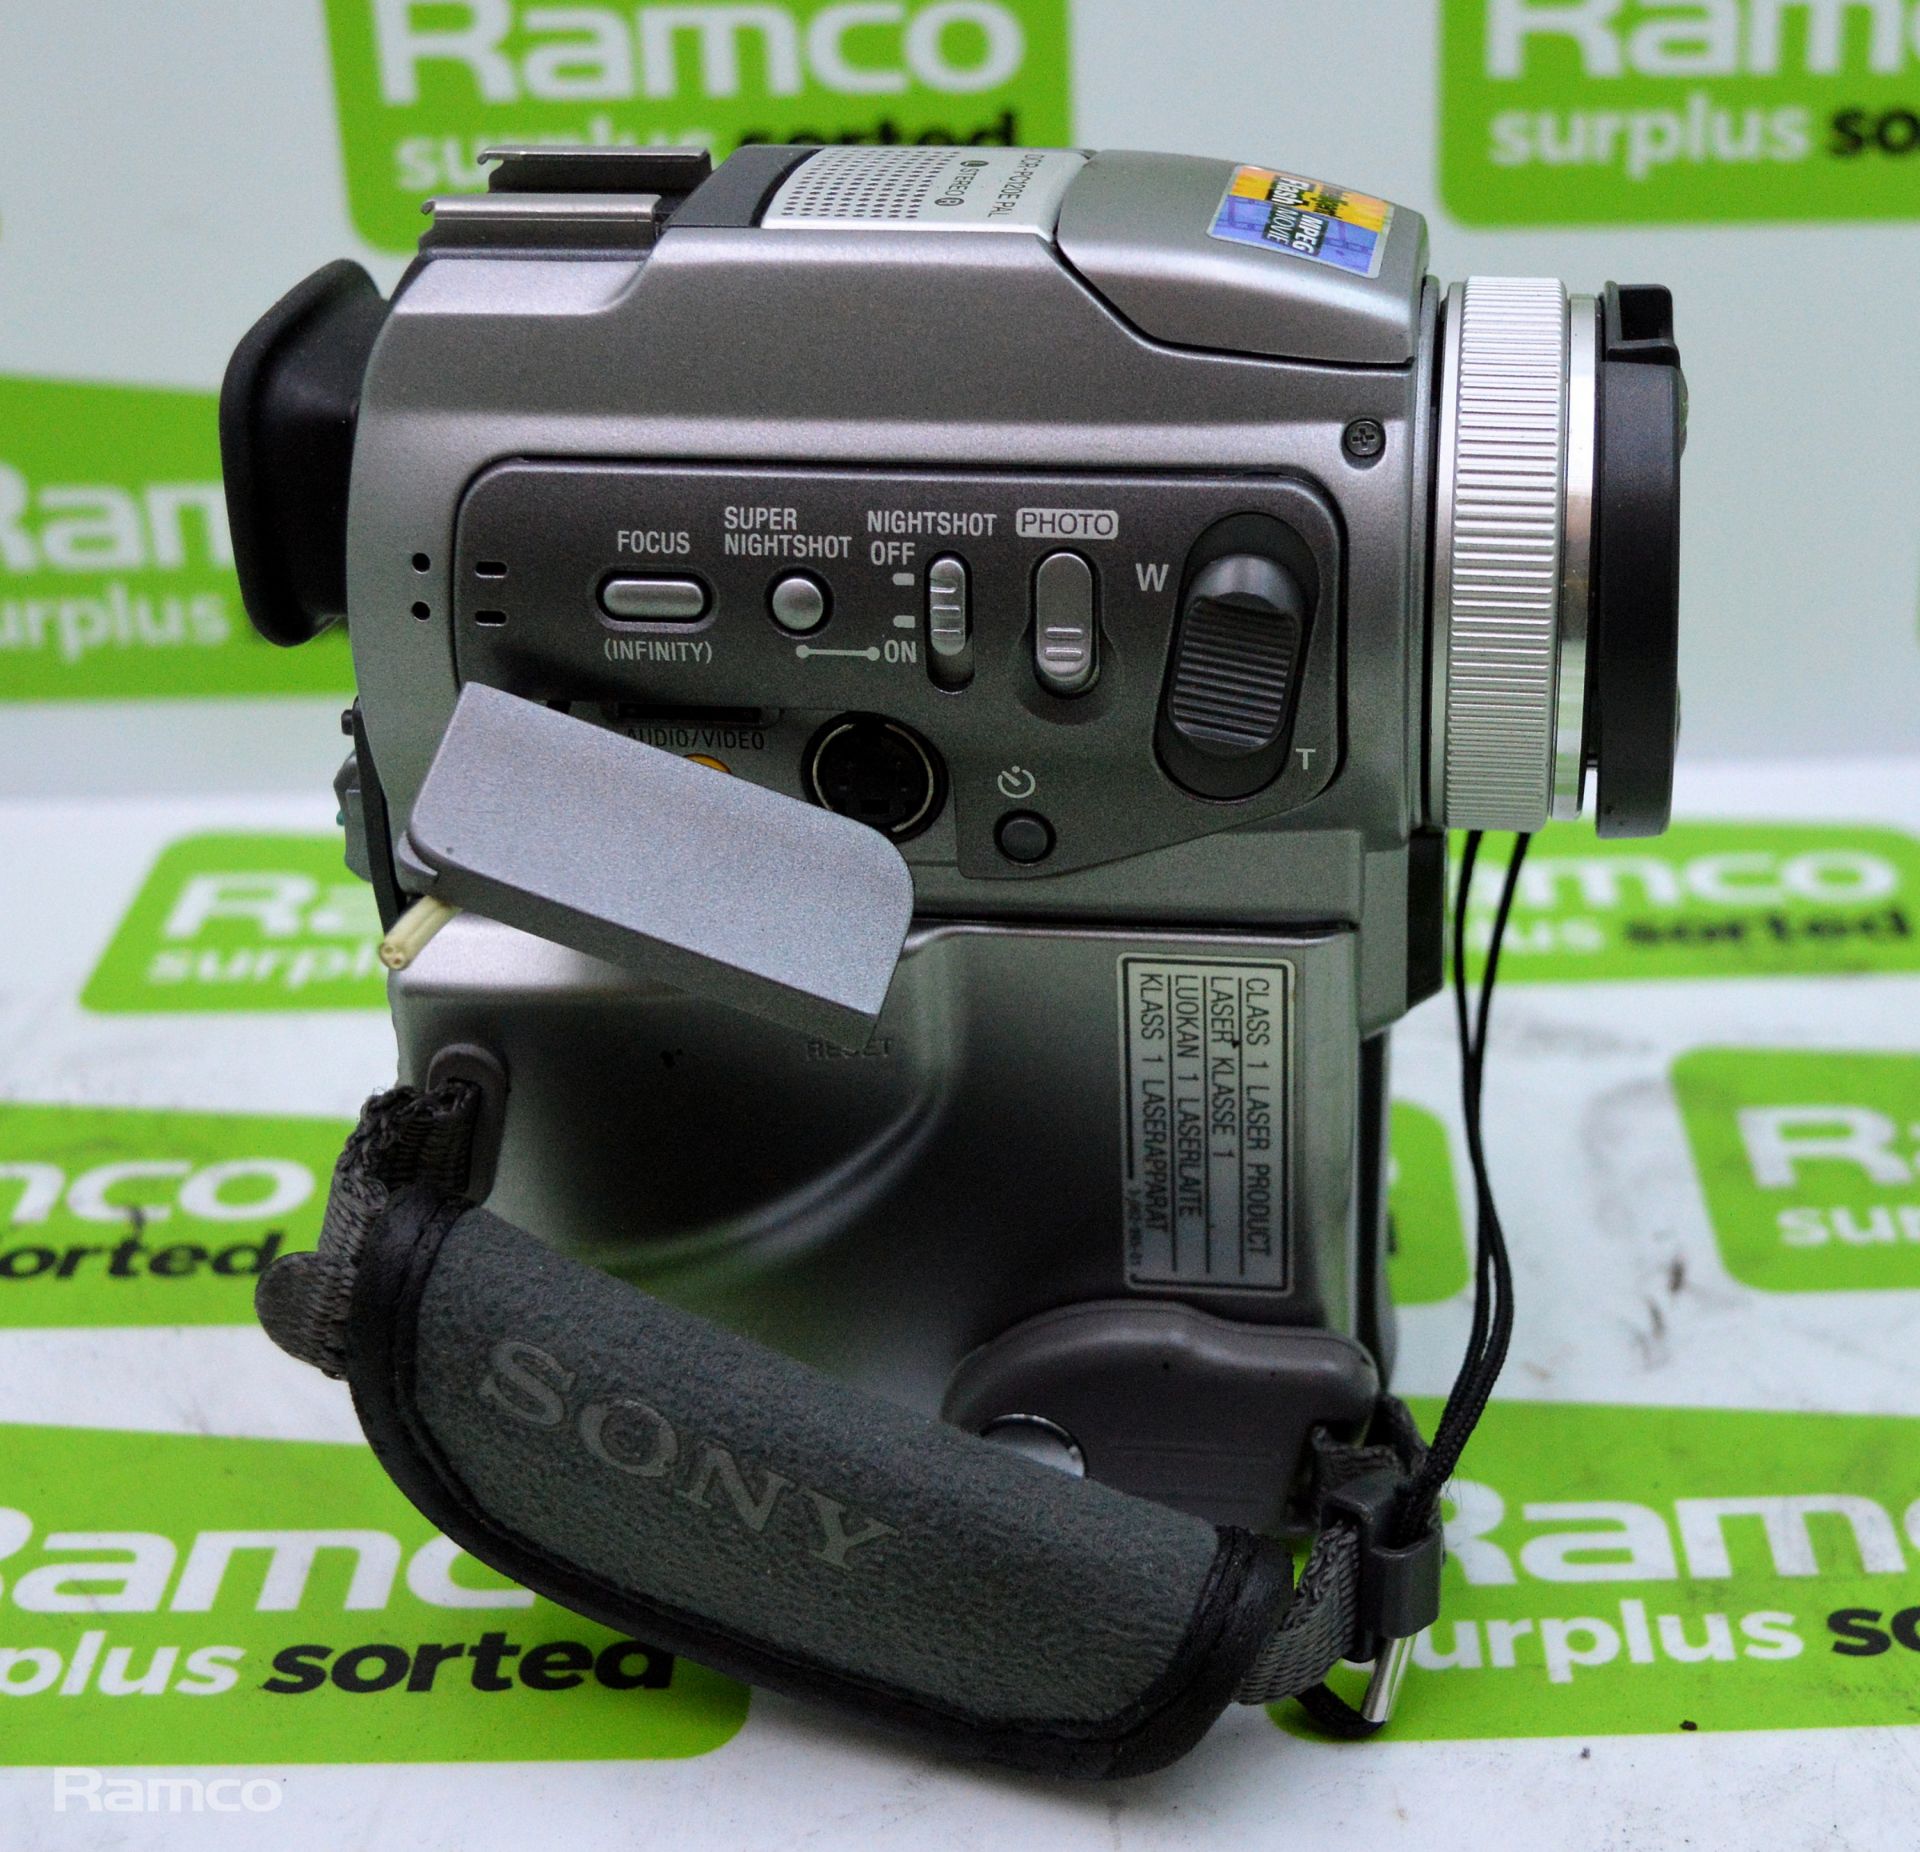 Sony DCR-PC120E Video Camcorder With Accessories In Case - Image 4 of 6